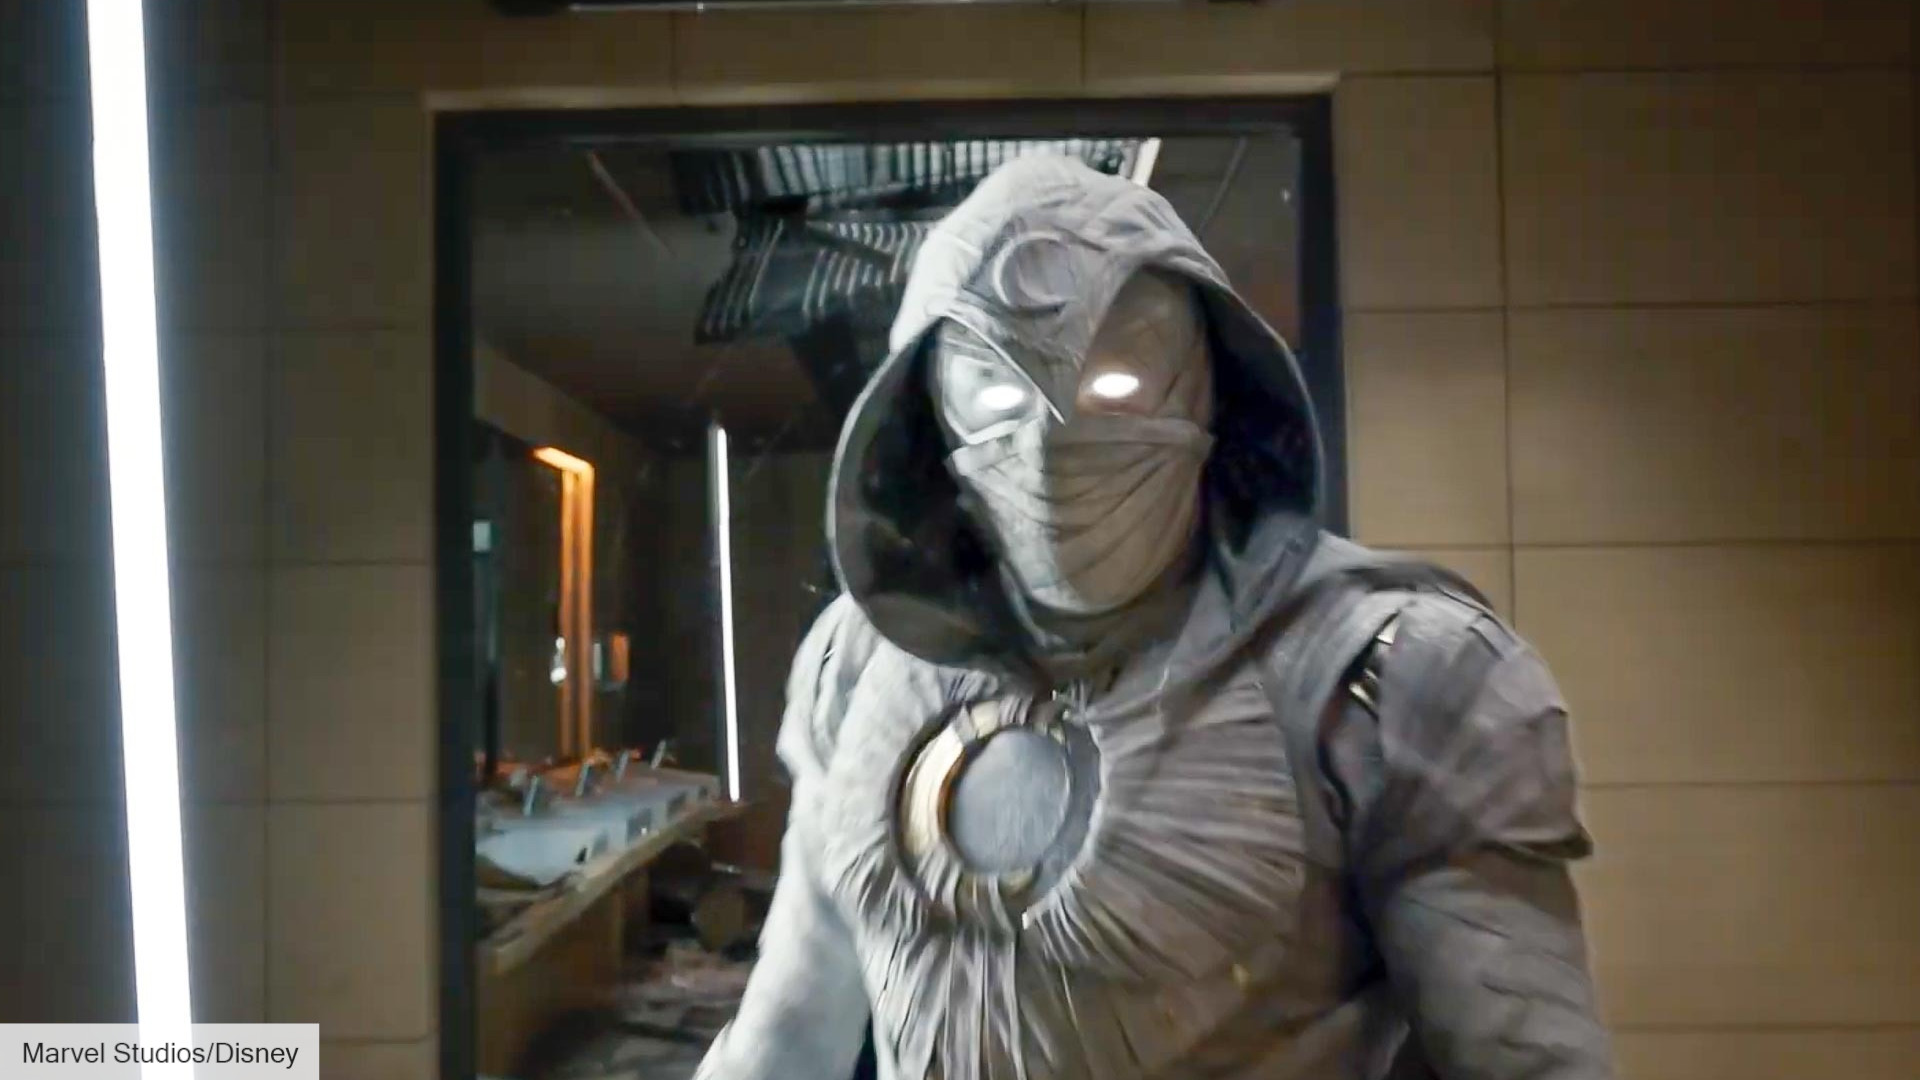 Moon Knight Season 2: Release Date, what to expect, cast, leaks, and more